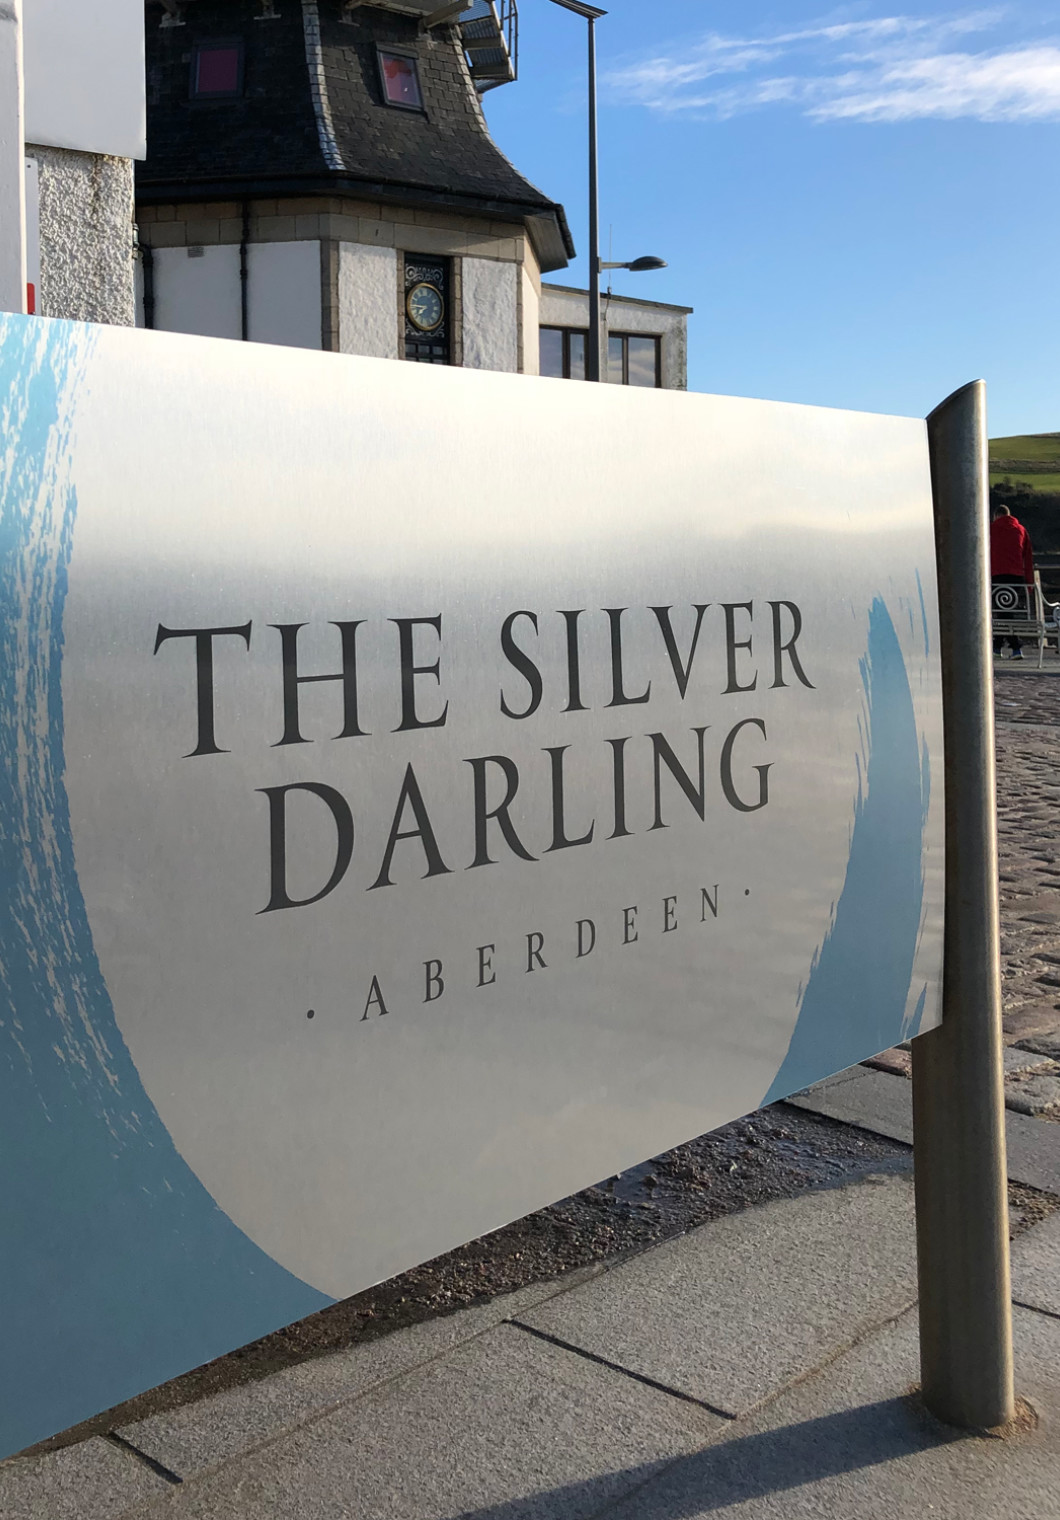 The Silver Darling